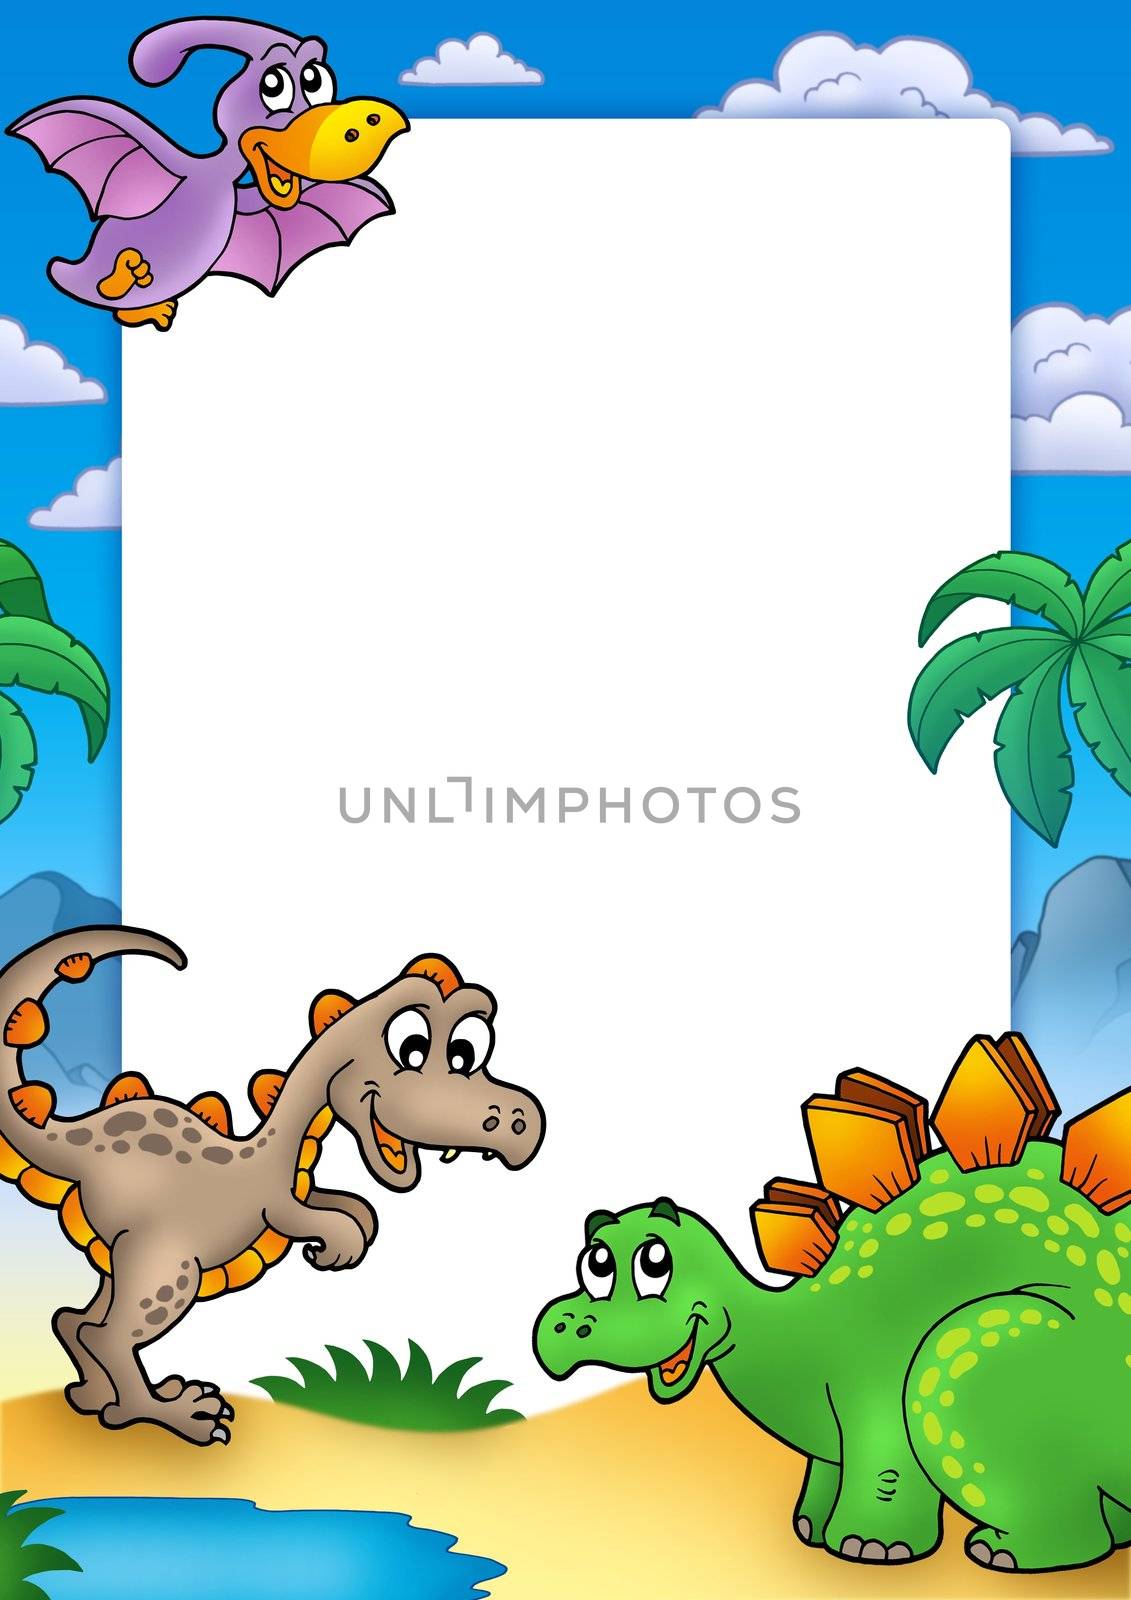 Prehistoric frame with dinosaurs by clairev